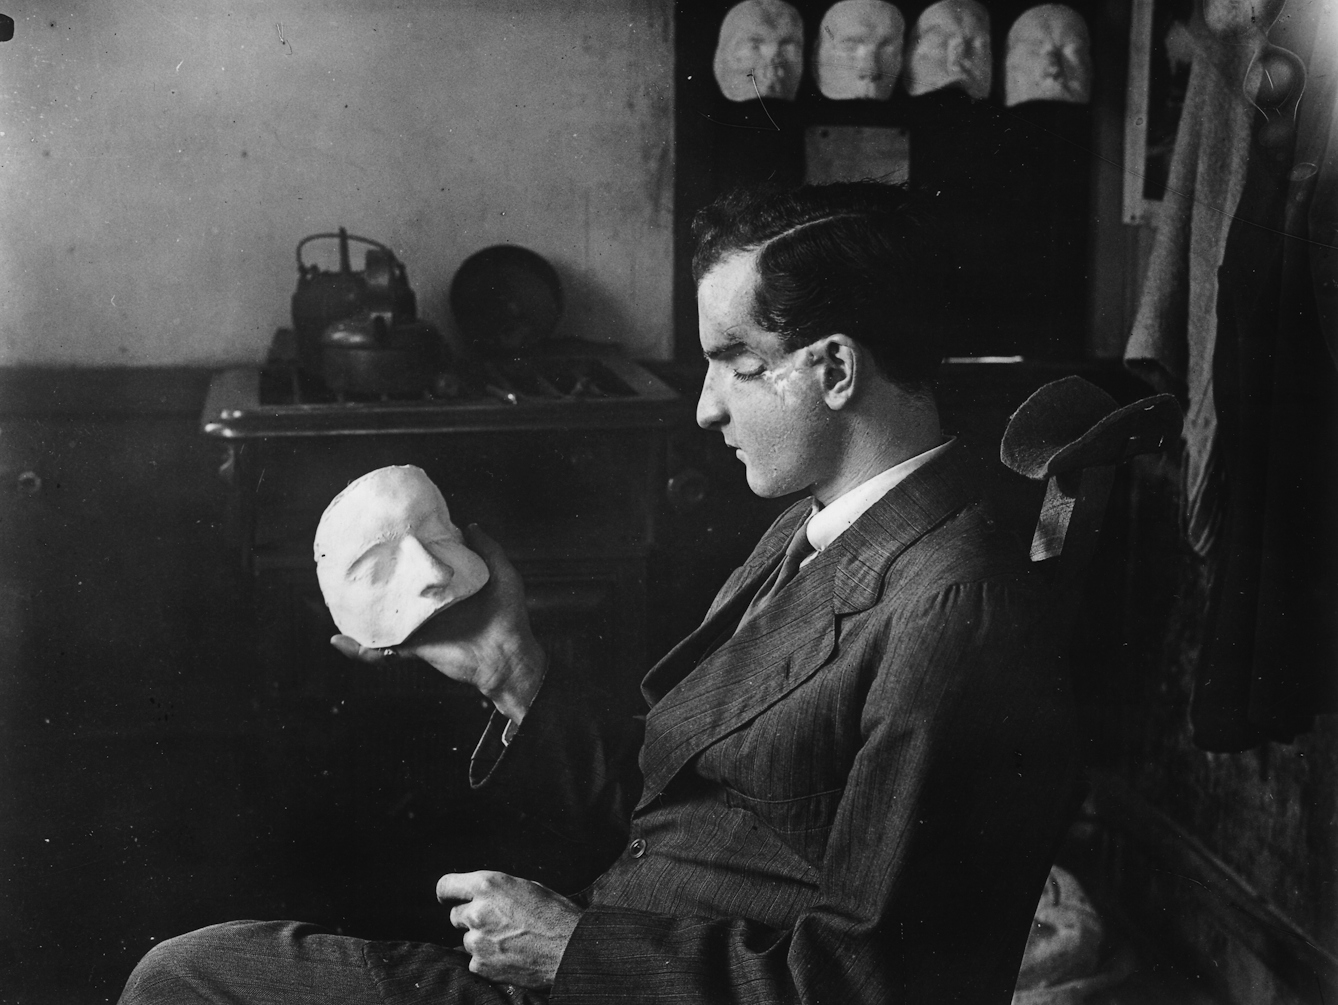 A patient examines a plaster cast of his own face which will be used to conceal the loss of his eye.